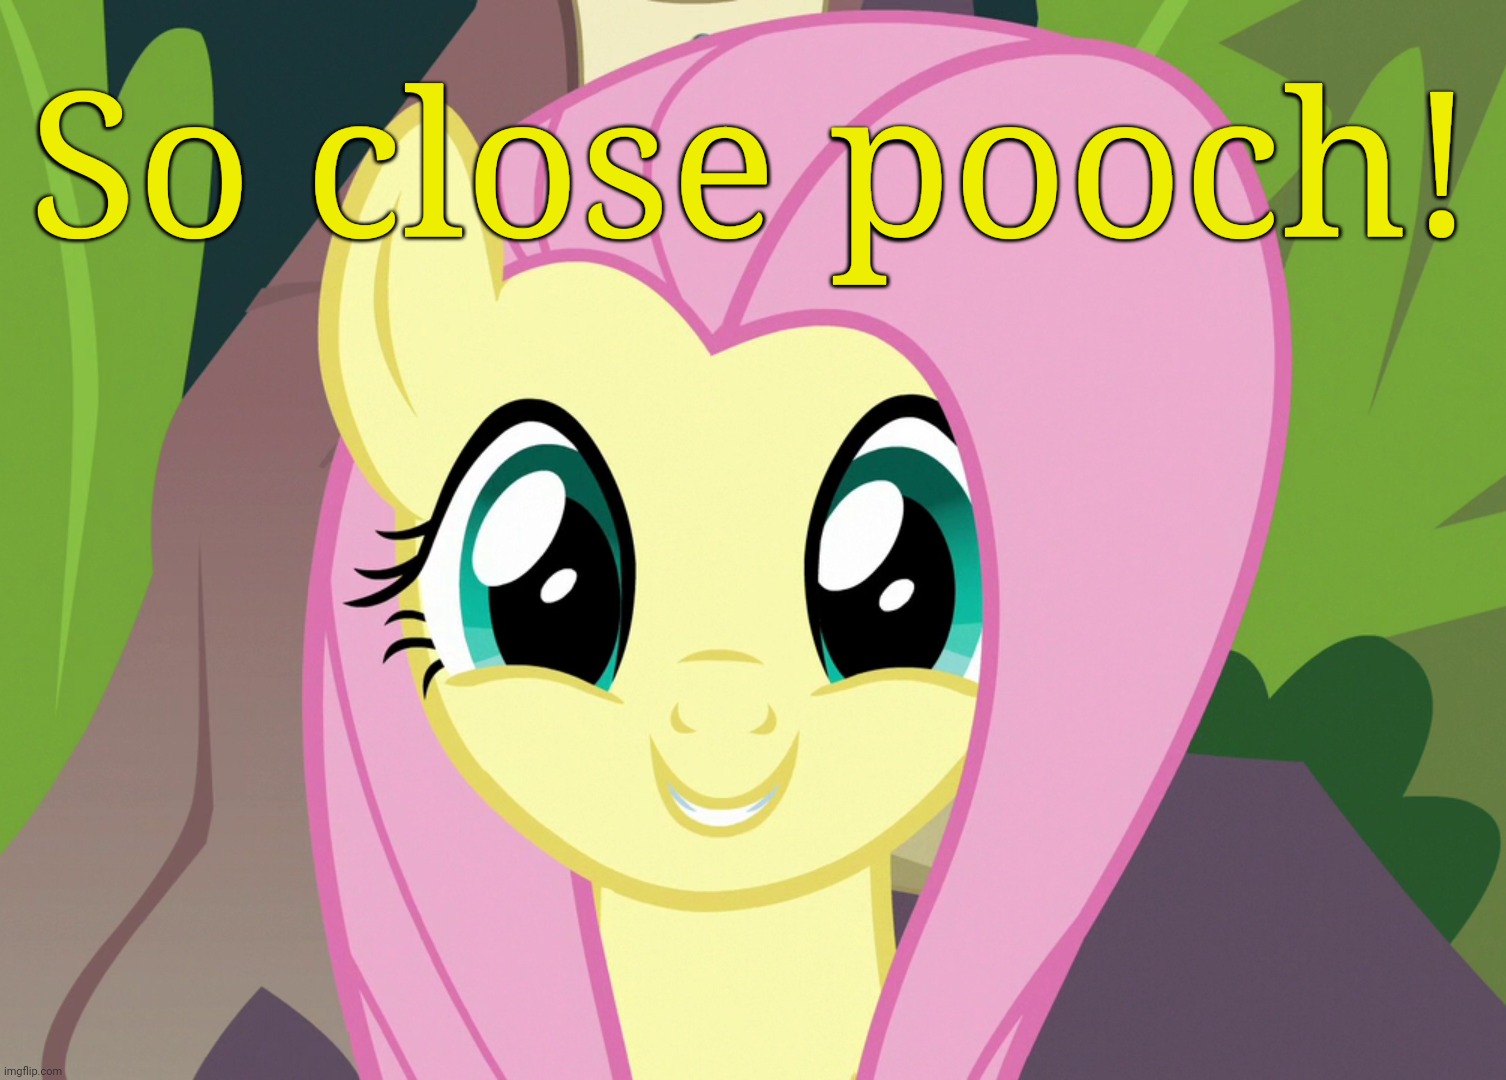 Shyabetes 2 (MLP) | So close pooch! | image tagged in shyabetes 2 mlp | made w/ Imgflip meme maker